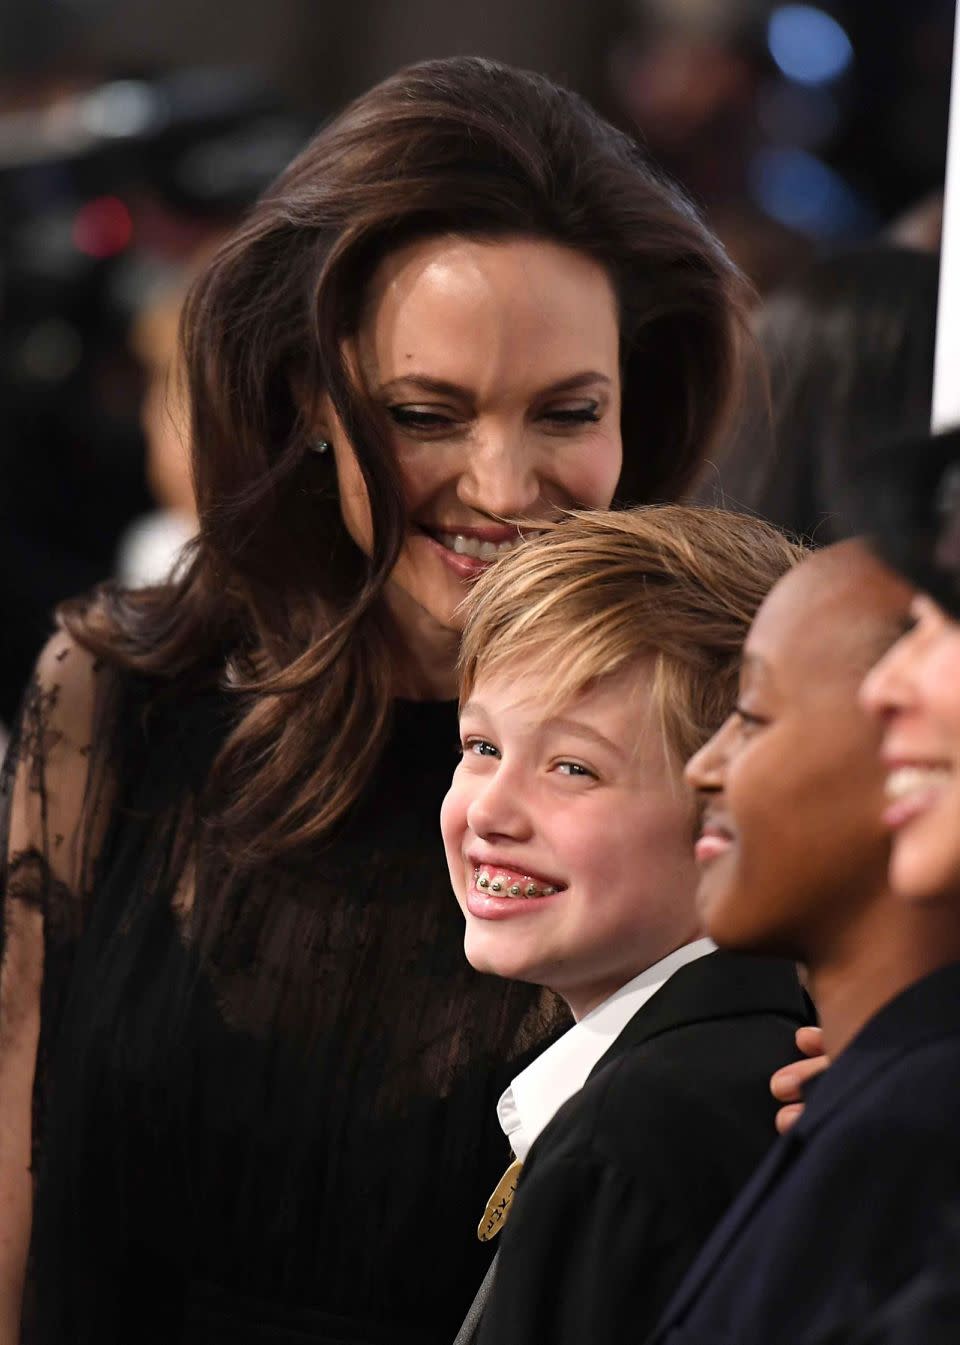 The 42-year-old was being a doting mother to Shiloh. Source: Getty